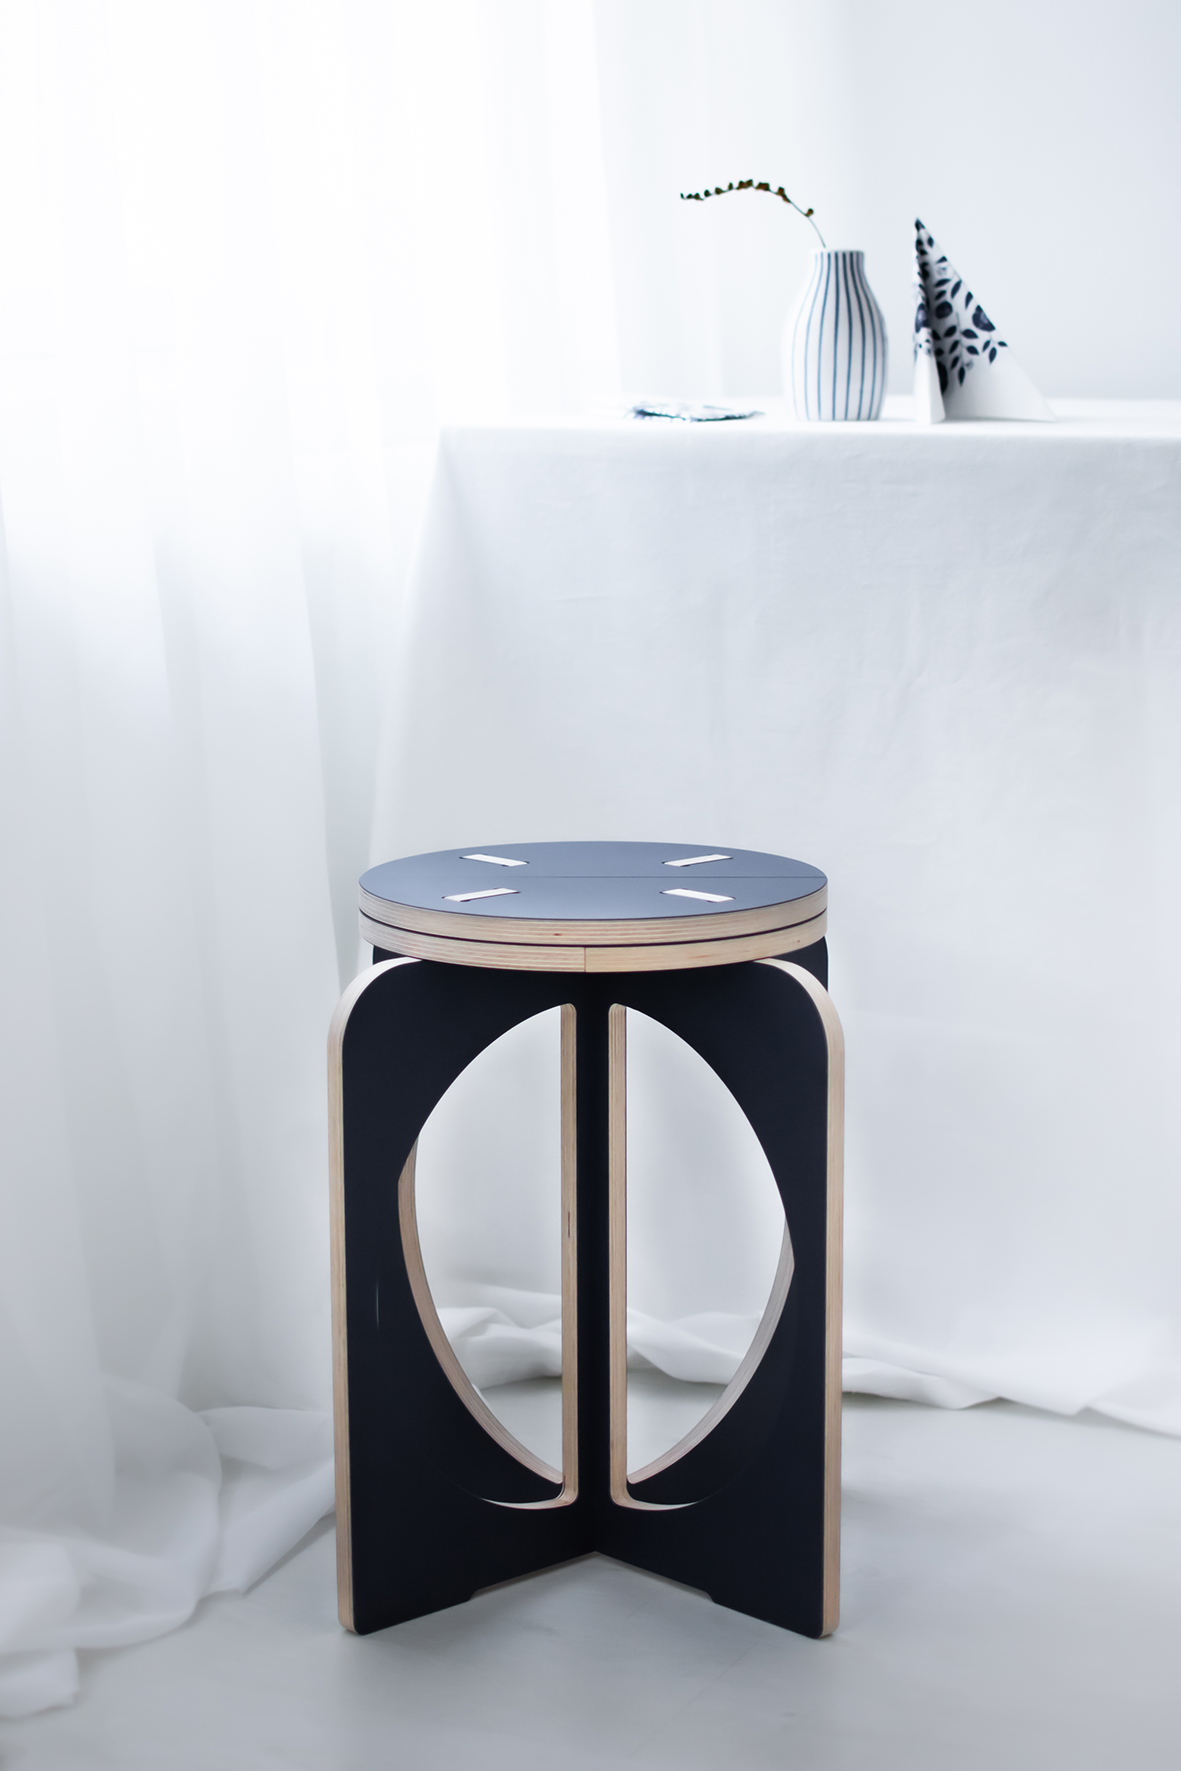 Opilion blue design stool. In the background, a white-blue pot with one branch. Next to the pot is a napkin.  